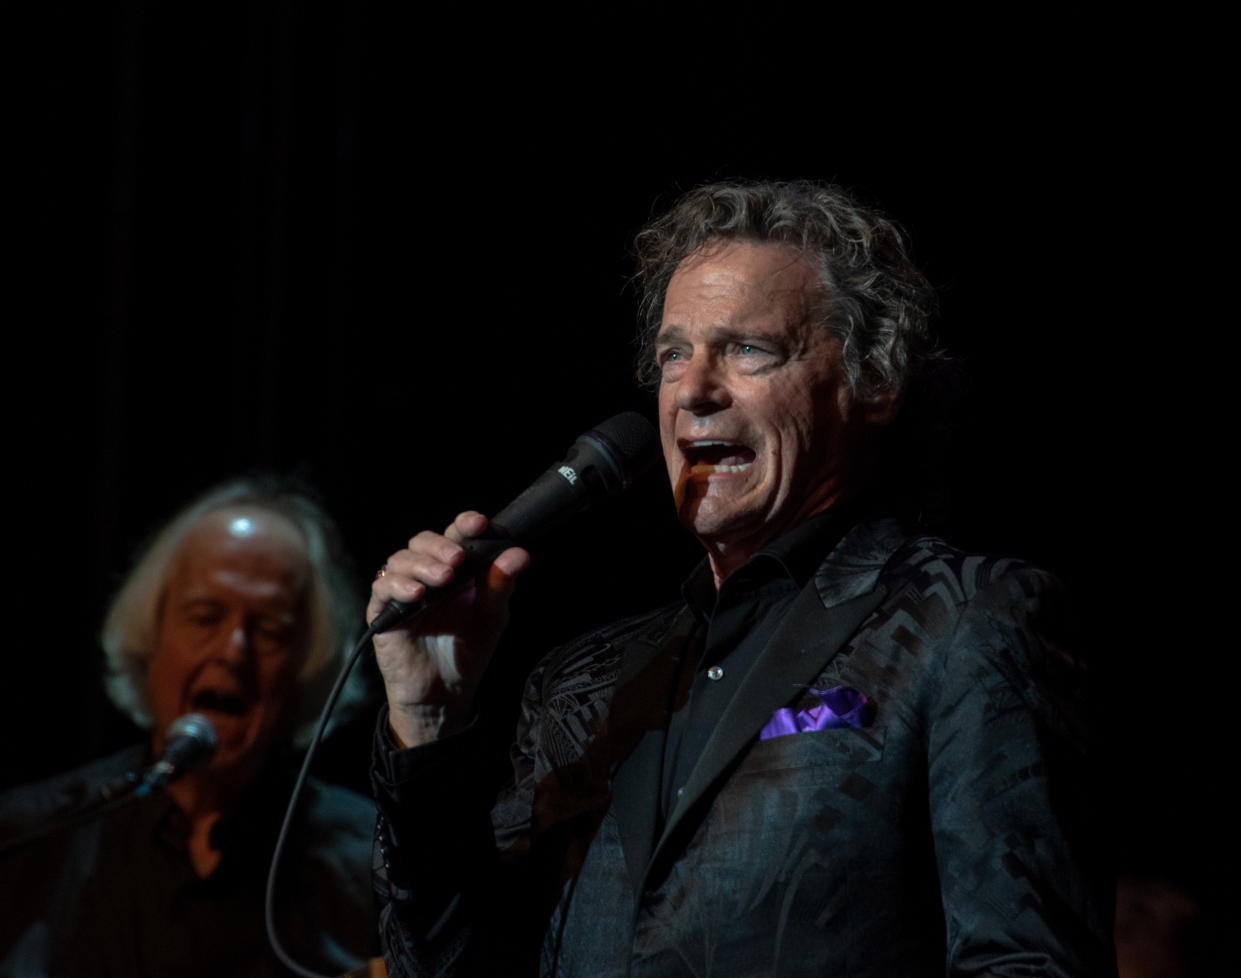 BJ Thomas a five-time Grammy recipient performs some of his legendary songs including 